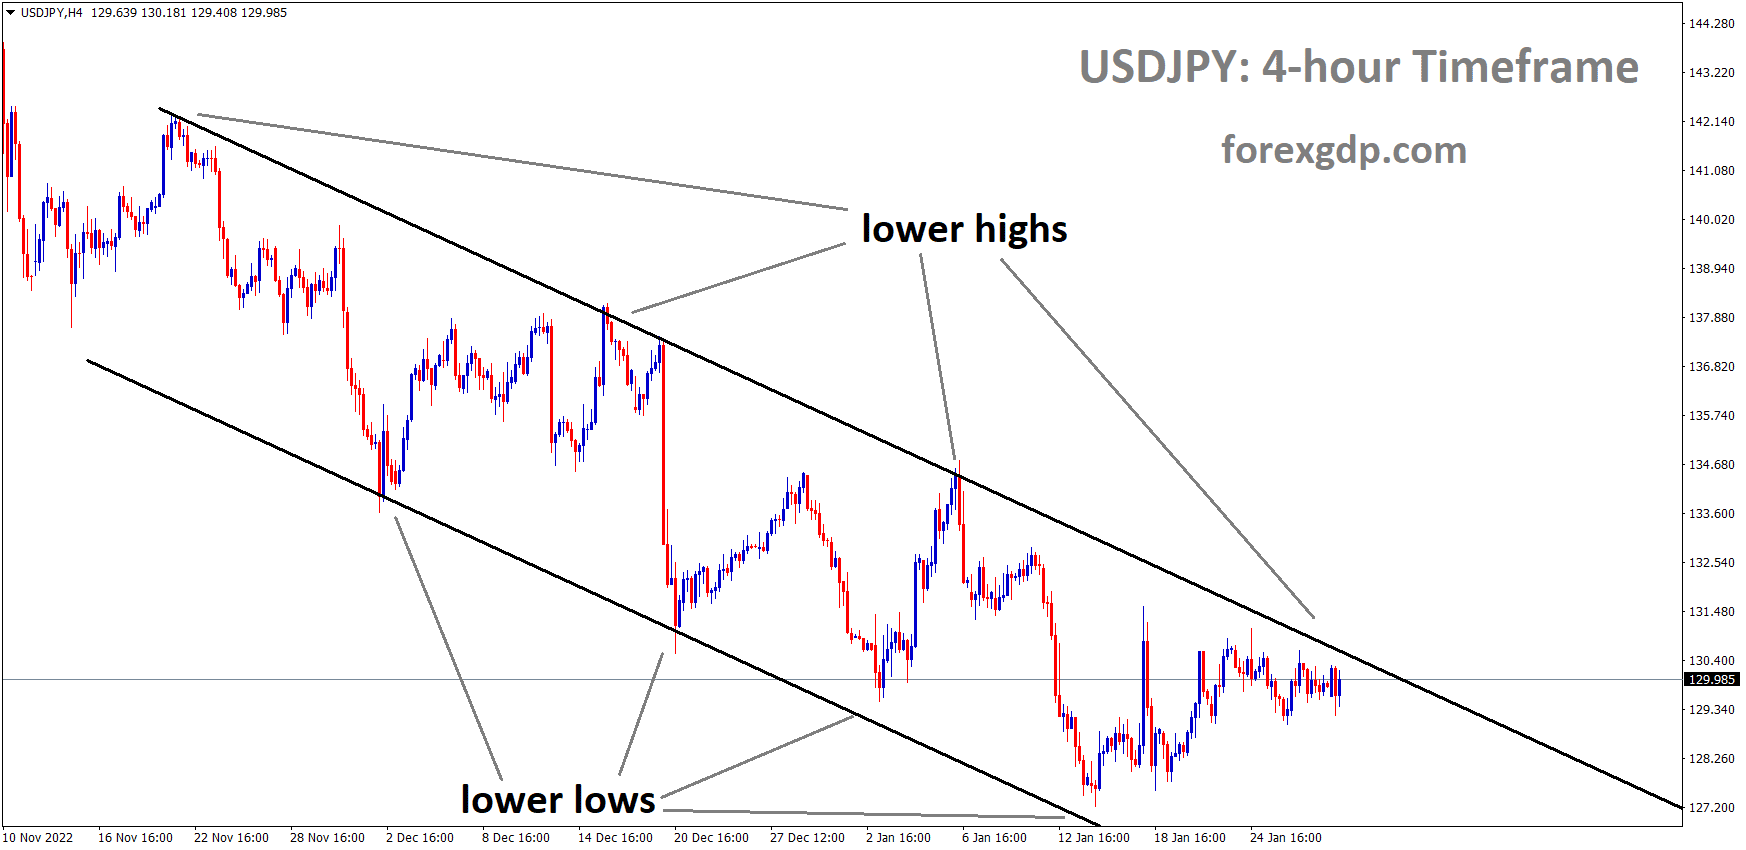 USDJPY is moving in the Descending channel and the market has fallen from the lower high area of the channel 2